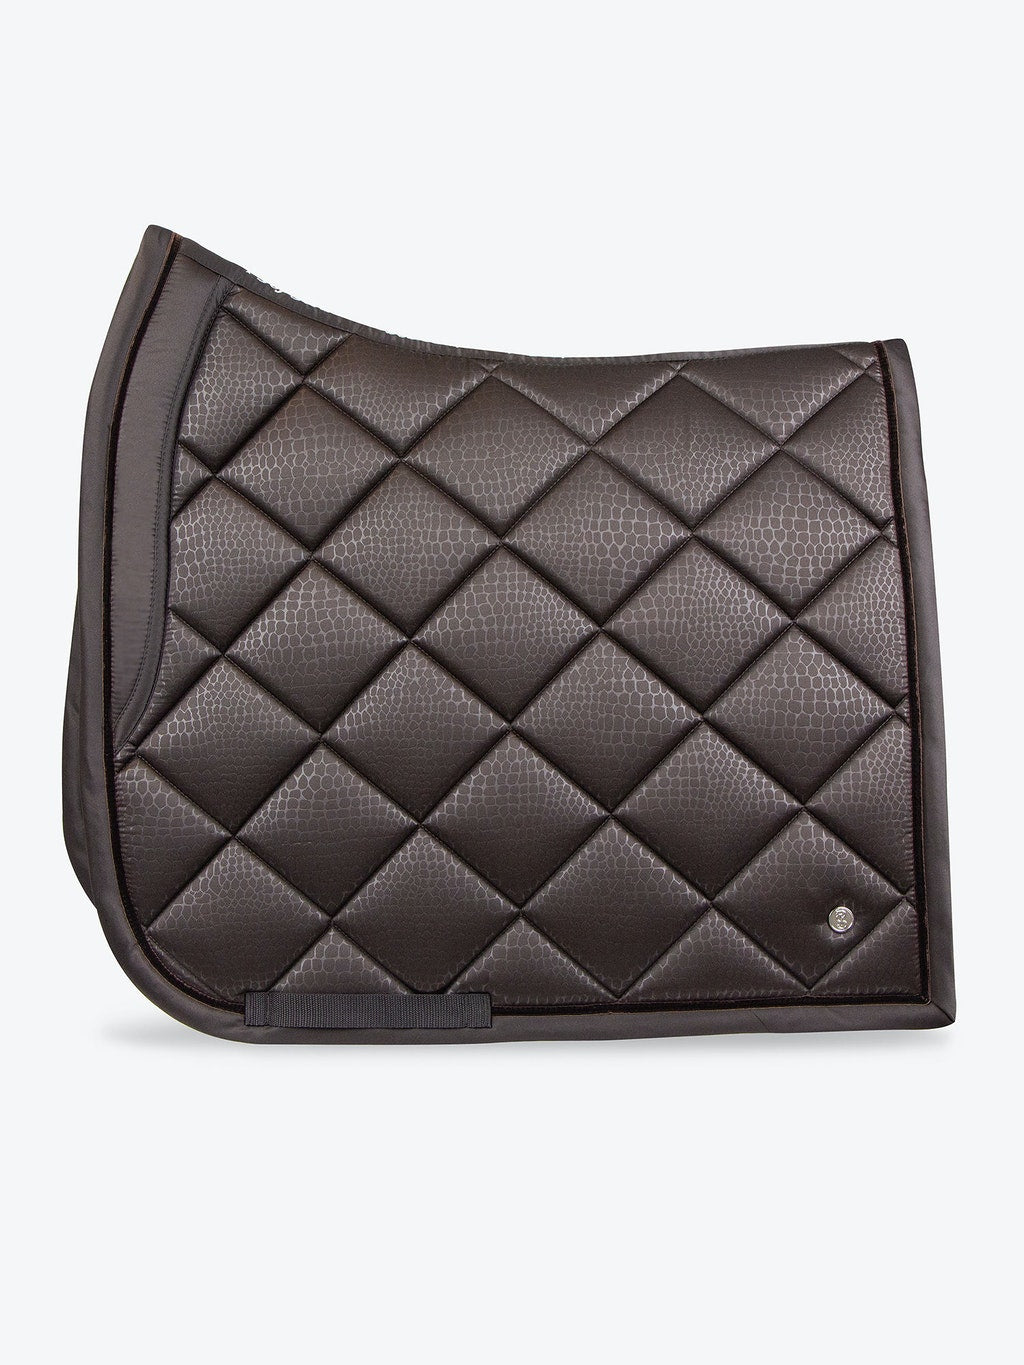 PS of Sweden Fall 21 Mamba Saddle Pad Coffee | Dressage or Jump